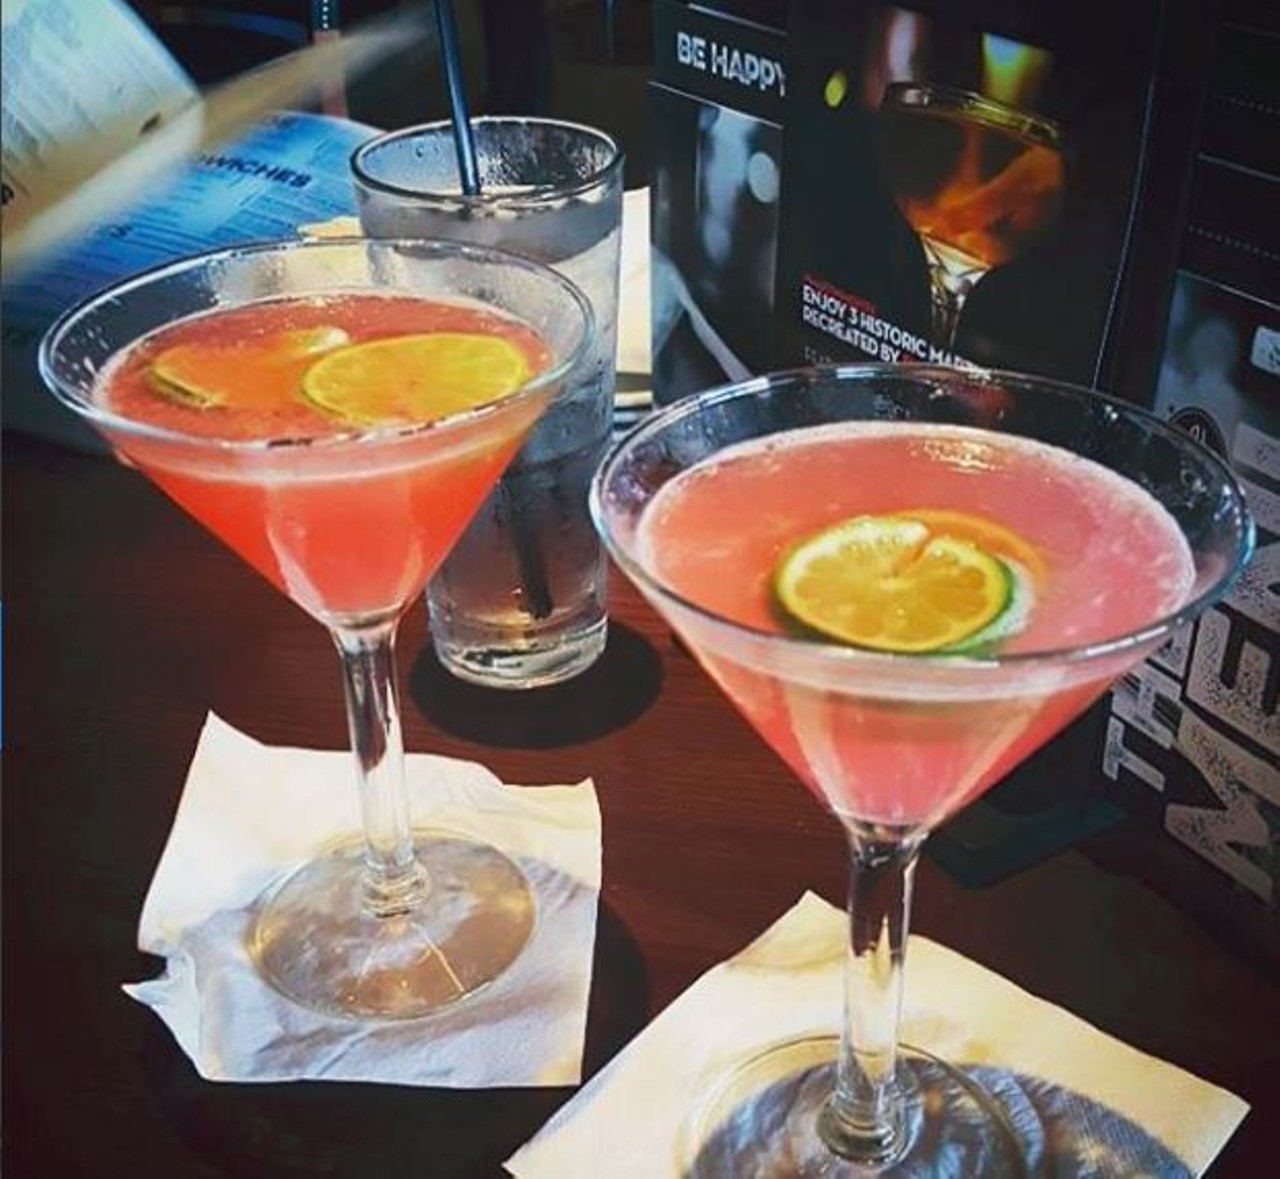 Bar Louie
Plaza on University, 4100 N Alafaya Trail, (407) 428-2980
If you want to avoid paying $9-$10 plus tax for one of Bar Louie&#146;s signature martinis, from 4 p.m. to 7 p.m., happy hour offers a better bang for your buck with $5.50 martinis, $3.50 drafts and $4.50 wines. Select apps are half priced too, so you can get a big ol&#146; plate of spinach and artichoke dip for a mere $4.
Photo via randombrownguy/Instagram